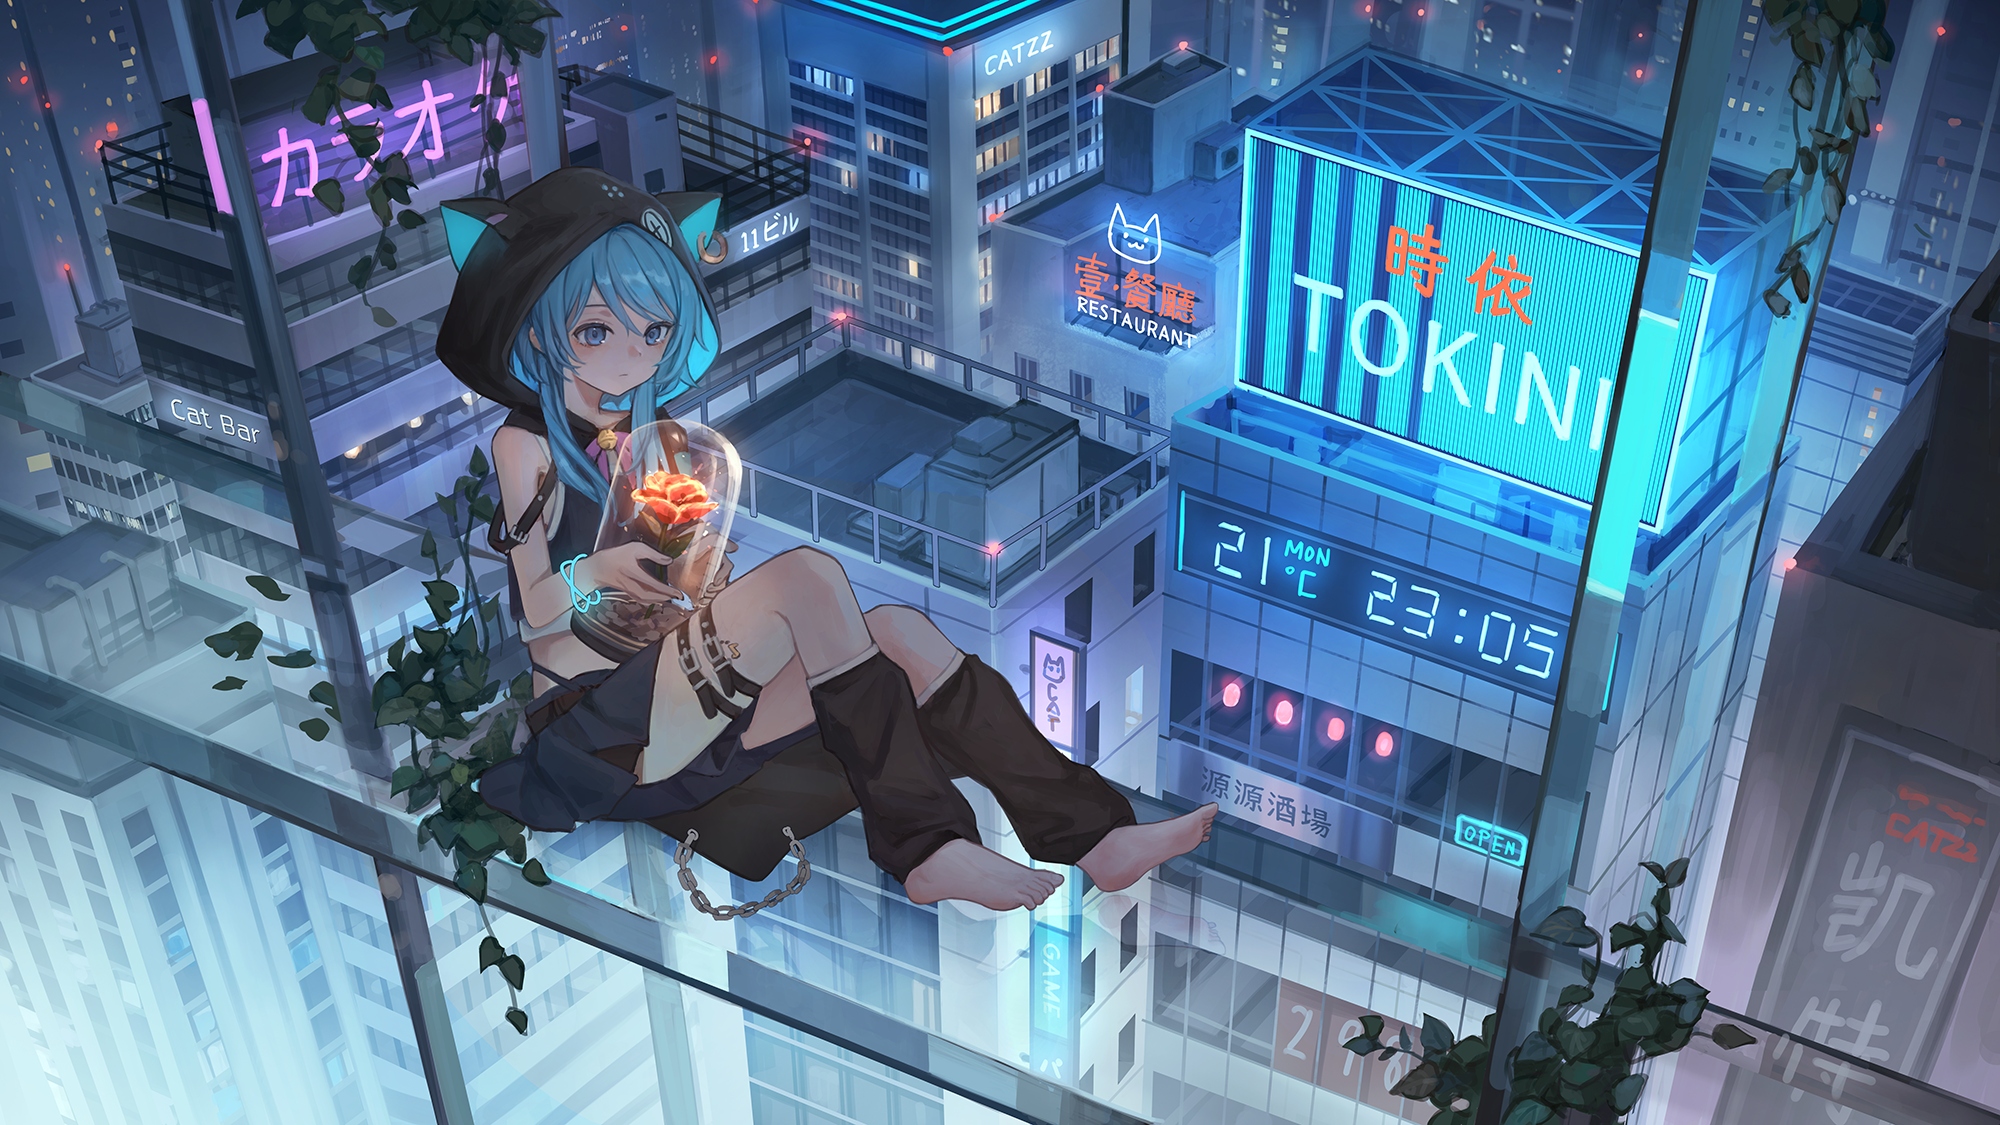 Anime 2000x1125 Pixiv anime catzz anime girls building neon time barefoot bare shoulders hoods blue hair blue eyes bracelets pointed toes flowers closed mouth hair between eyes bells cat ears leaves skirt night kanji city restaurant city lights signs rooftops